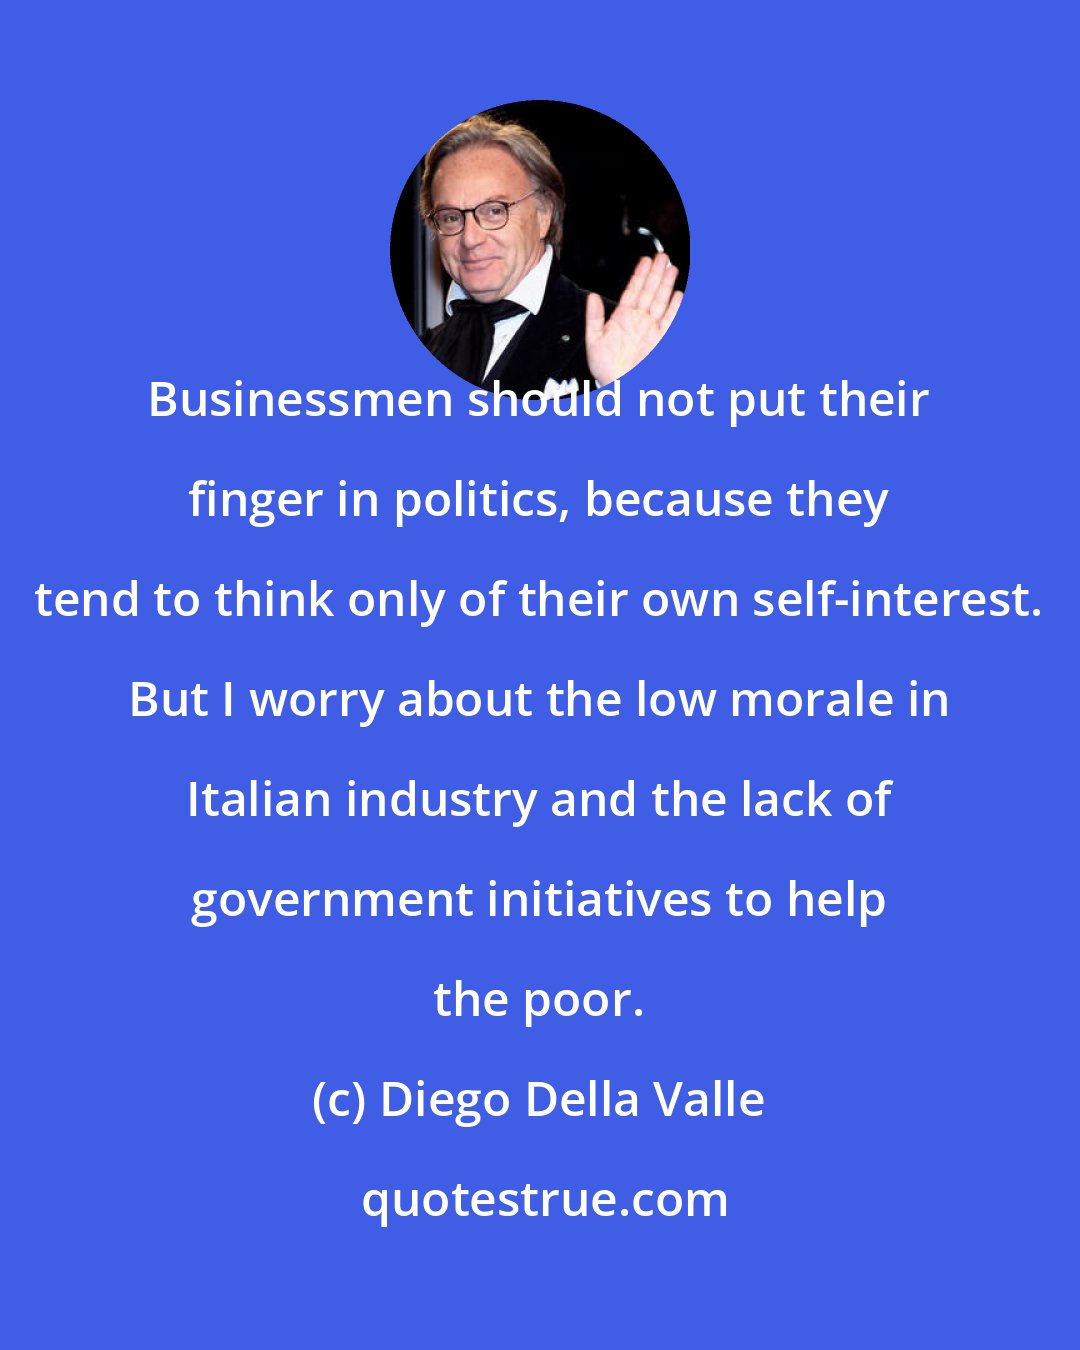 Diego Della Valle: Businessmen should not put their finger in politics, because they tend to think only of their own self-interest. But I worry about the low morale in Italian industry and the lack of government initiatives to help the poor.